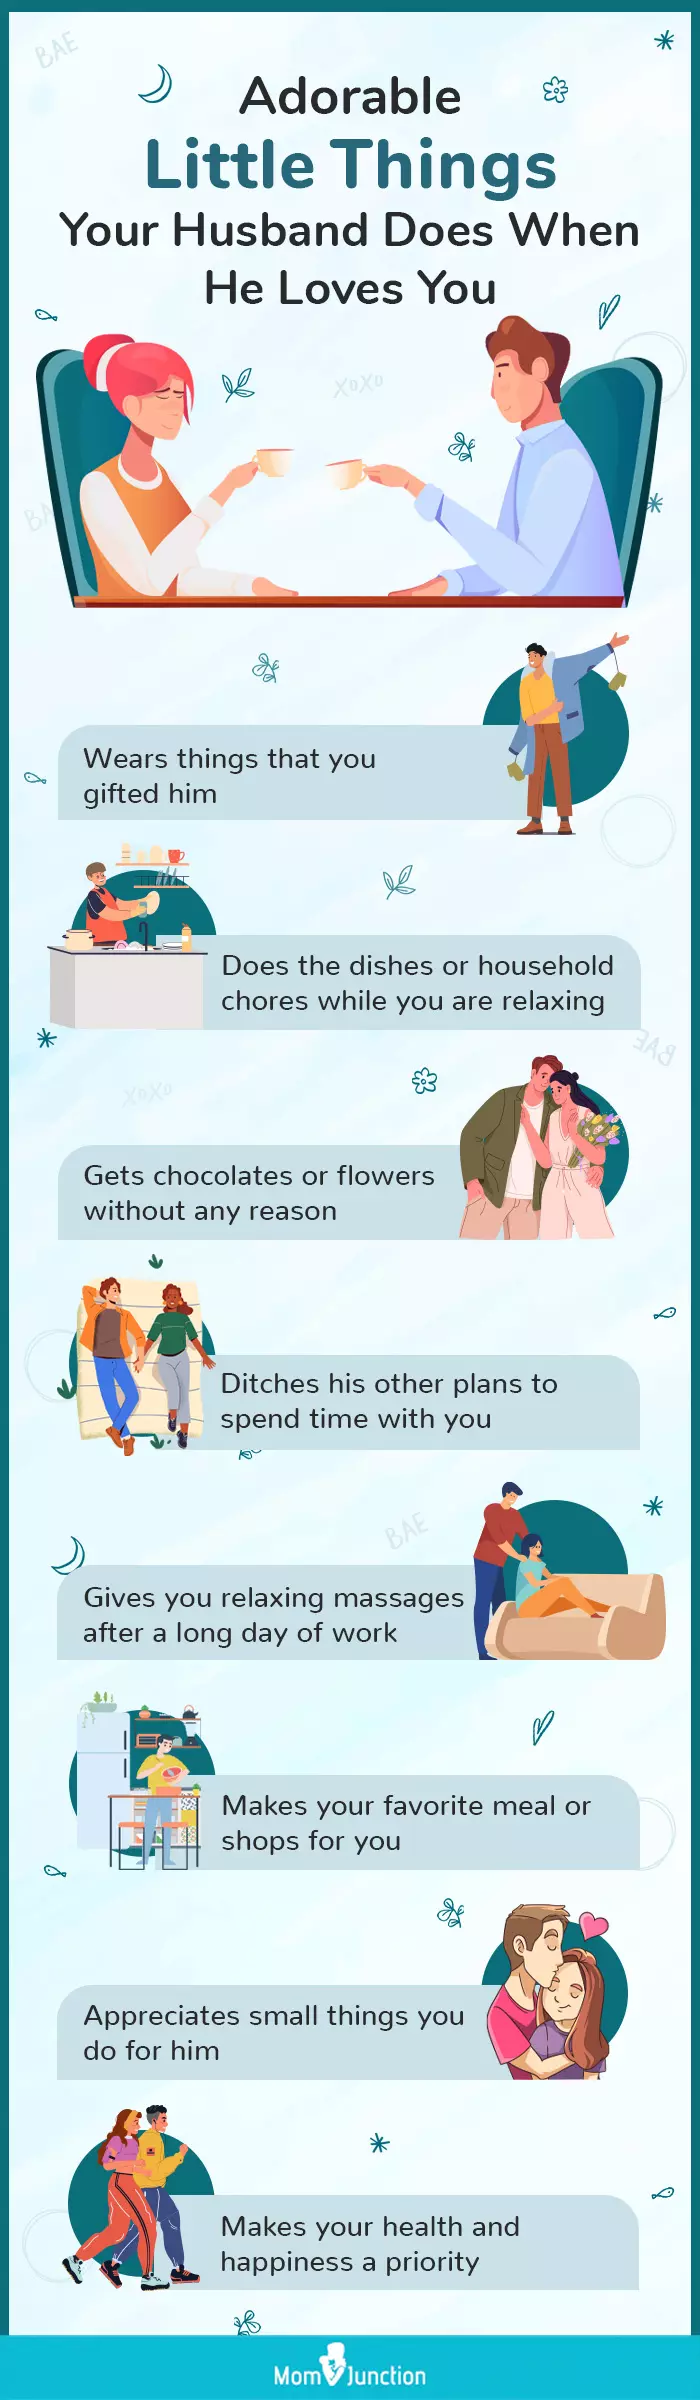 adorable little things your husband does when he loves you (infographic)